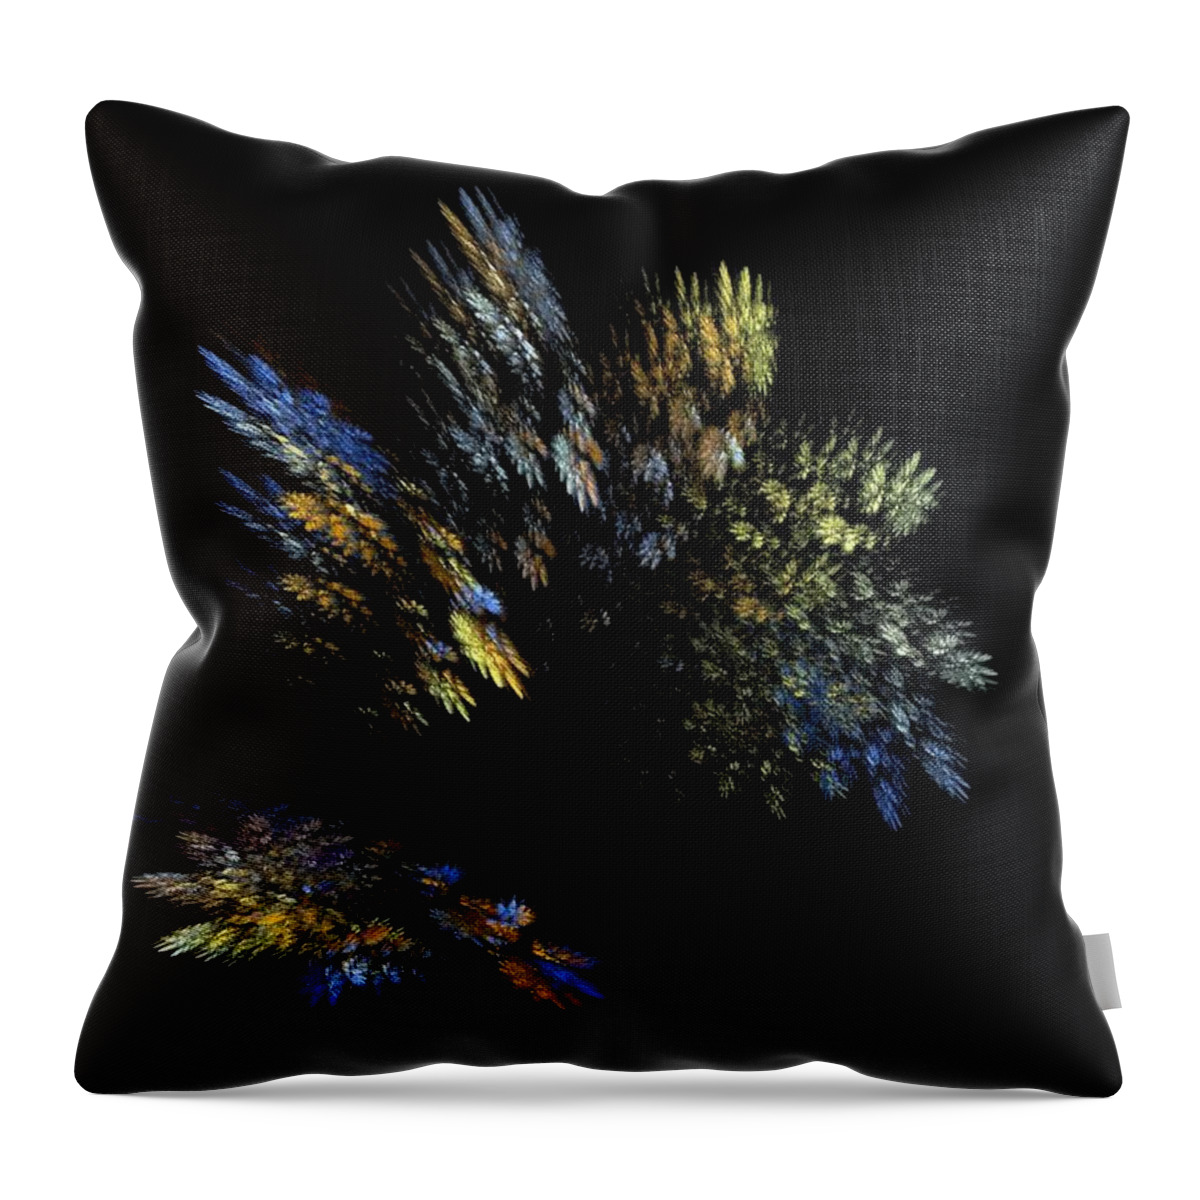 Abstract Throw Pillow featuring the digital art Missing Spots by Ester McGuire